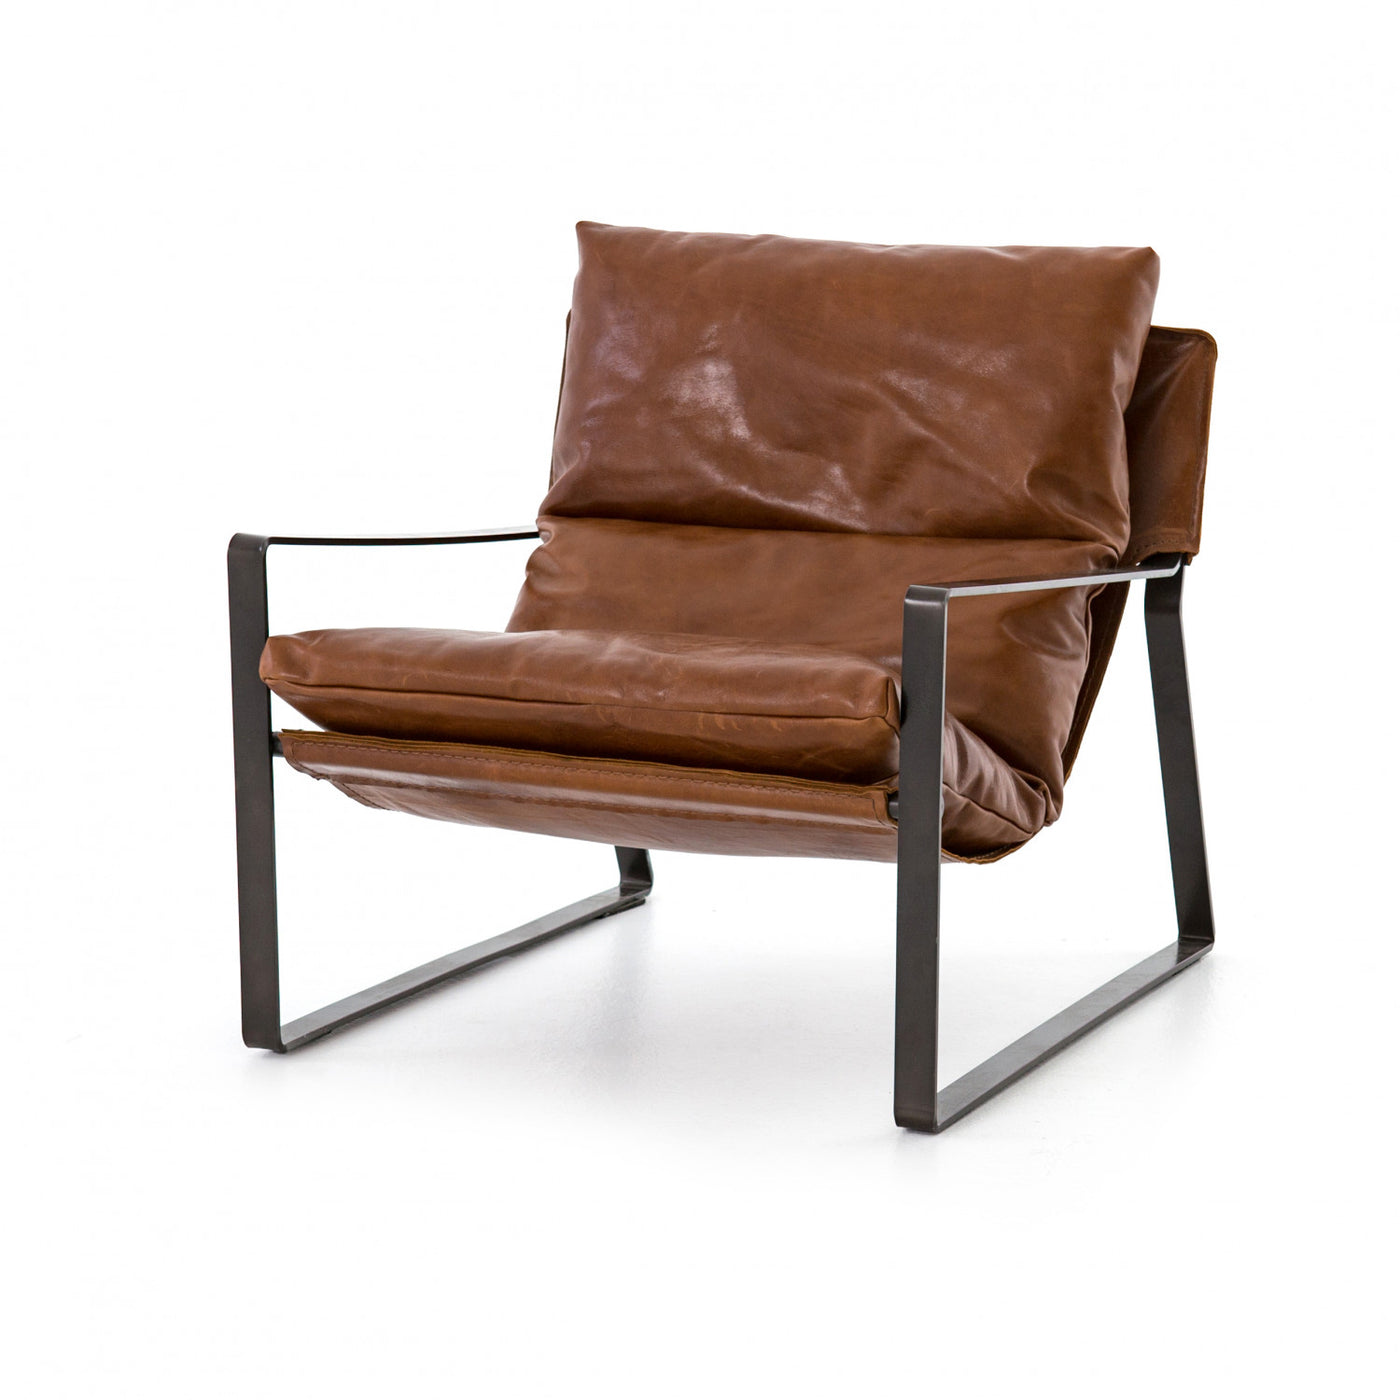 Parker Leather Sling Chair